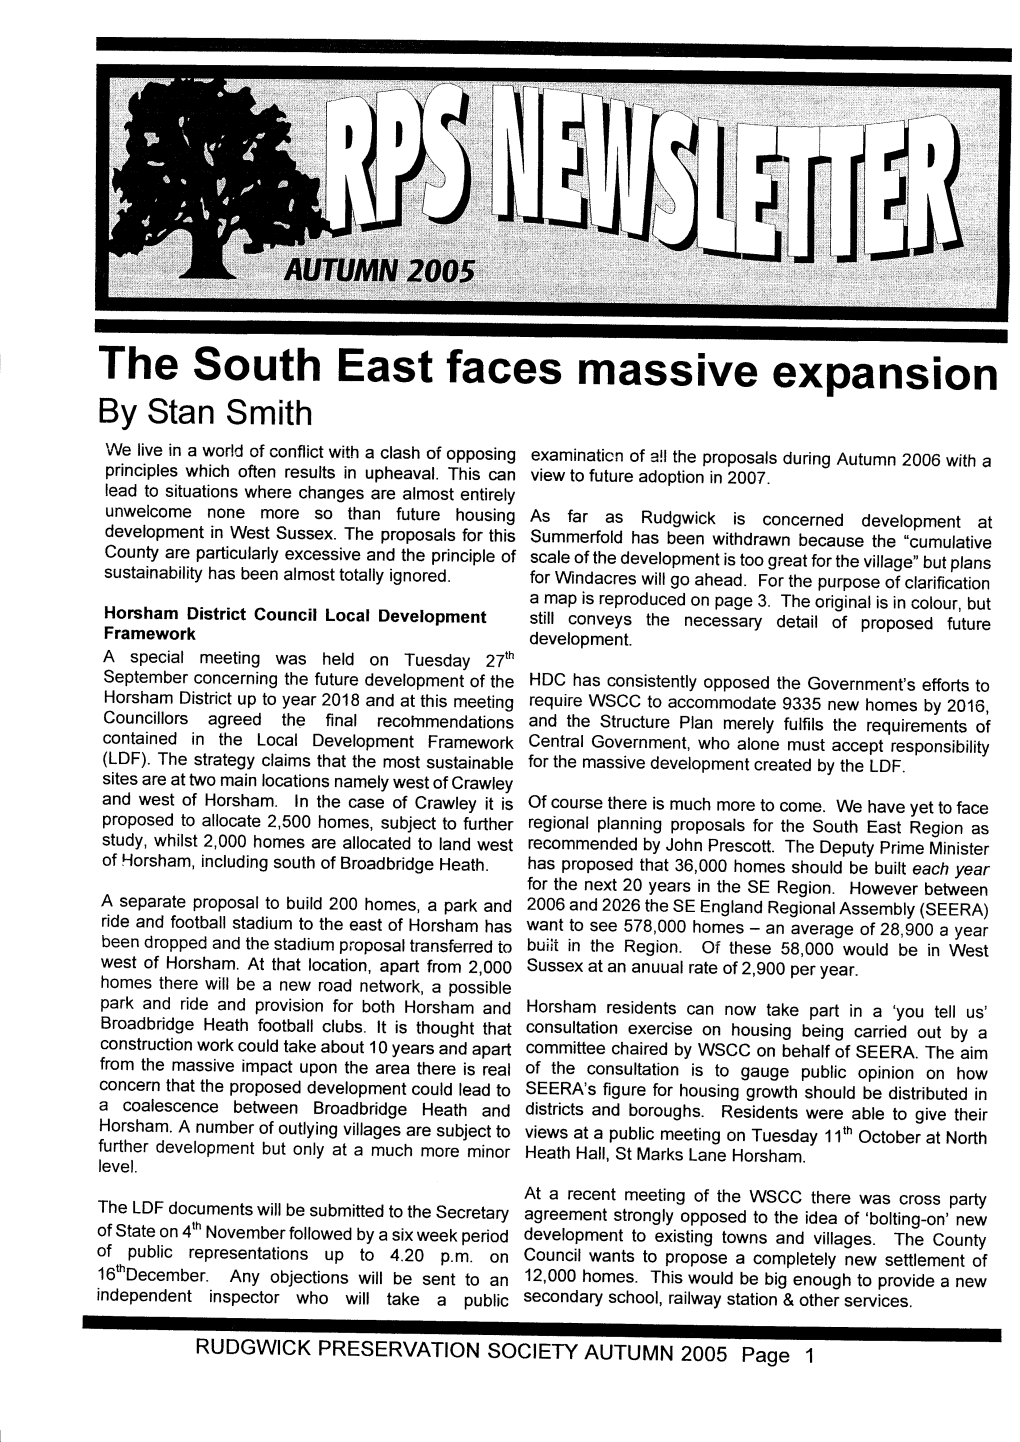 The South East Faces Massive Expansion